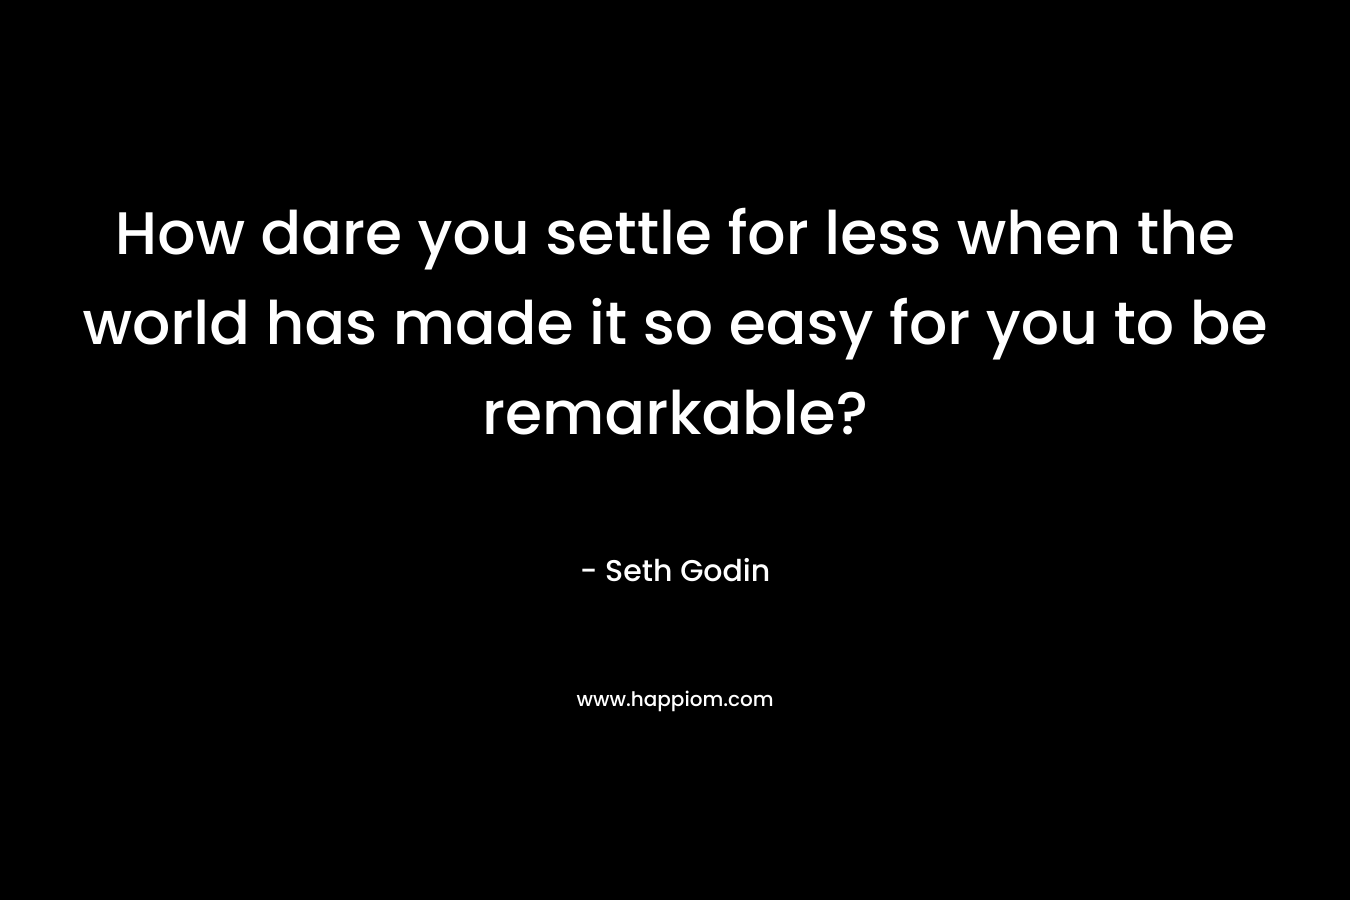 How dare you settle for less when the world has made it so easy for you to be remarkable?